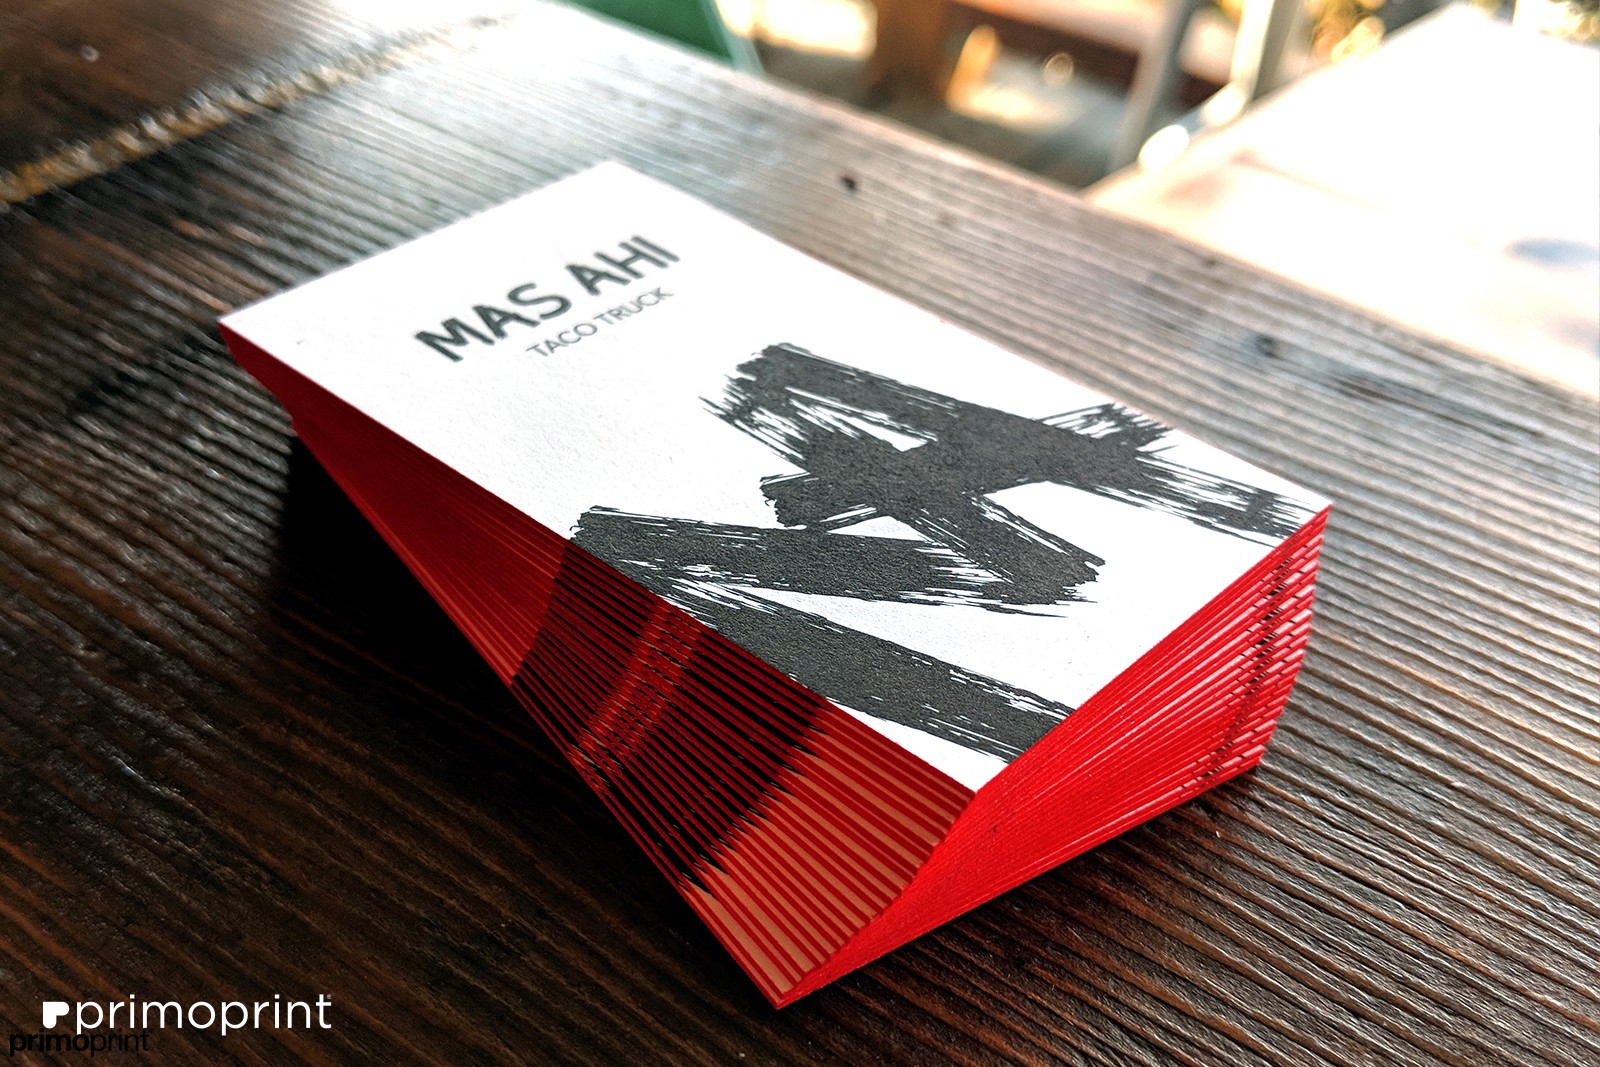 Printed on 32PT thick uncoated card stock with red painted edges. 